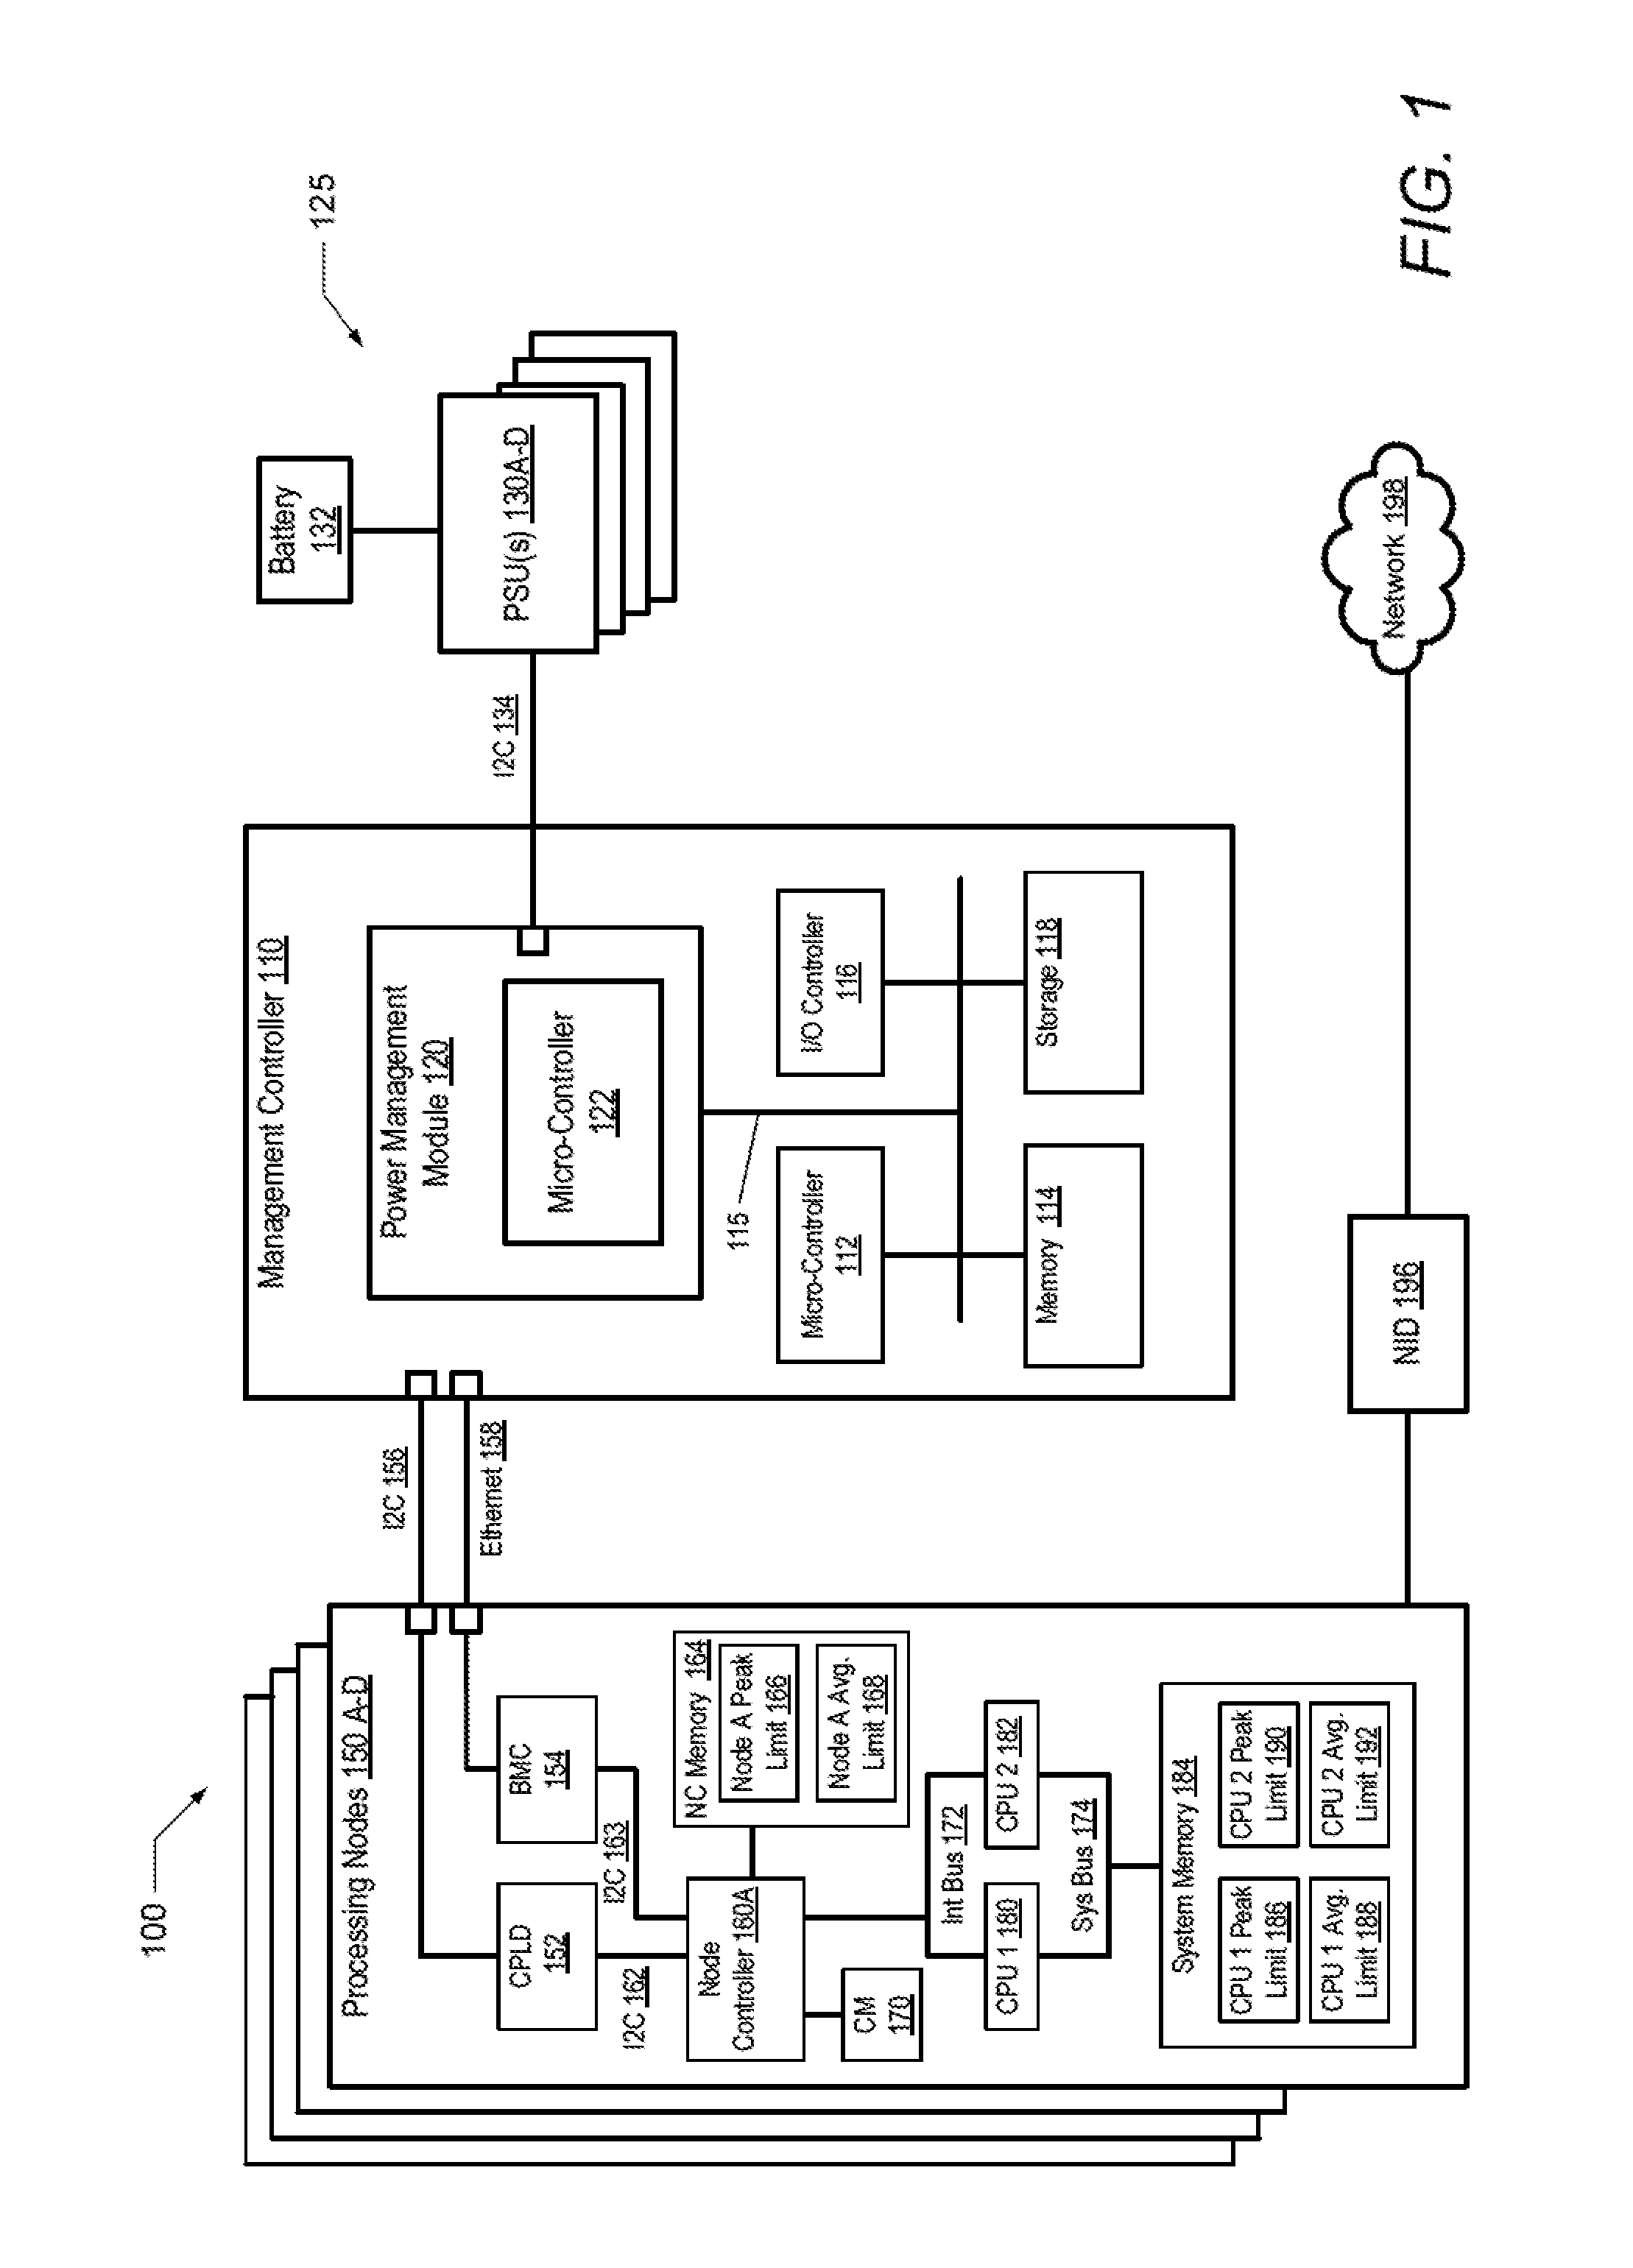 Dynanmic peak power limiting to processing nodes in an information handling system